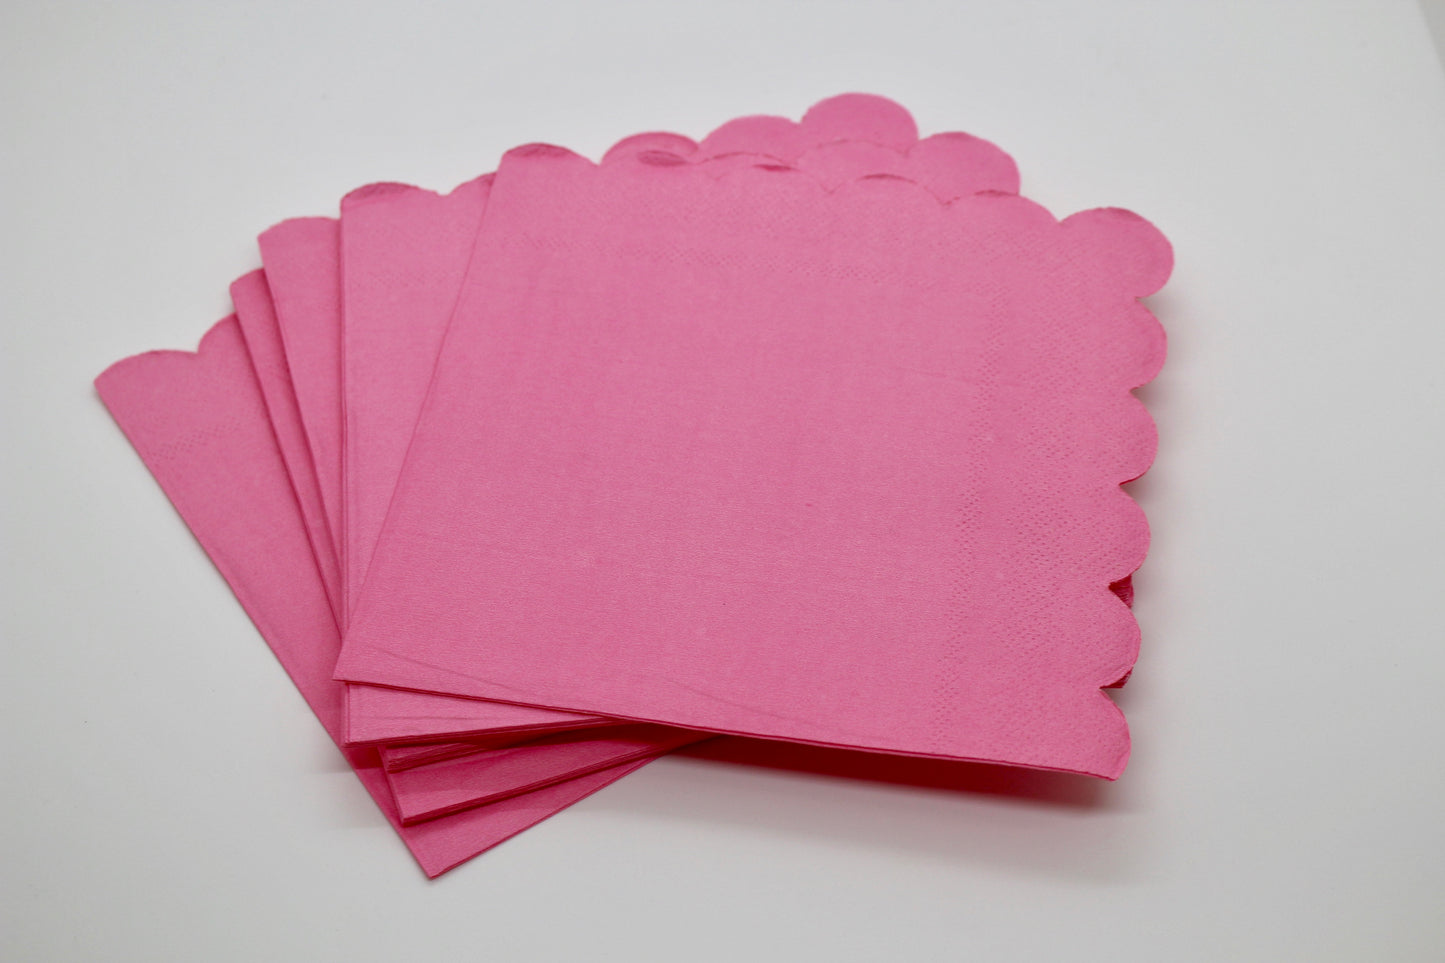 Rose Pink Paper Plate Set - 69 pieces!